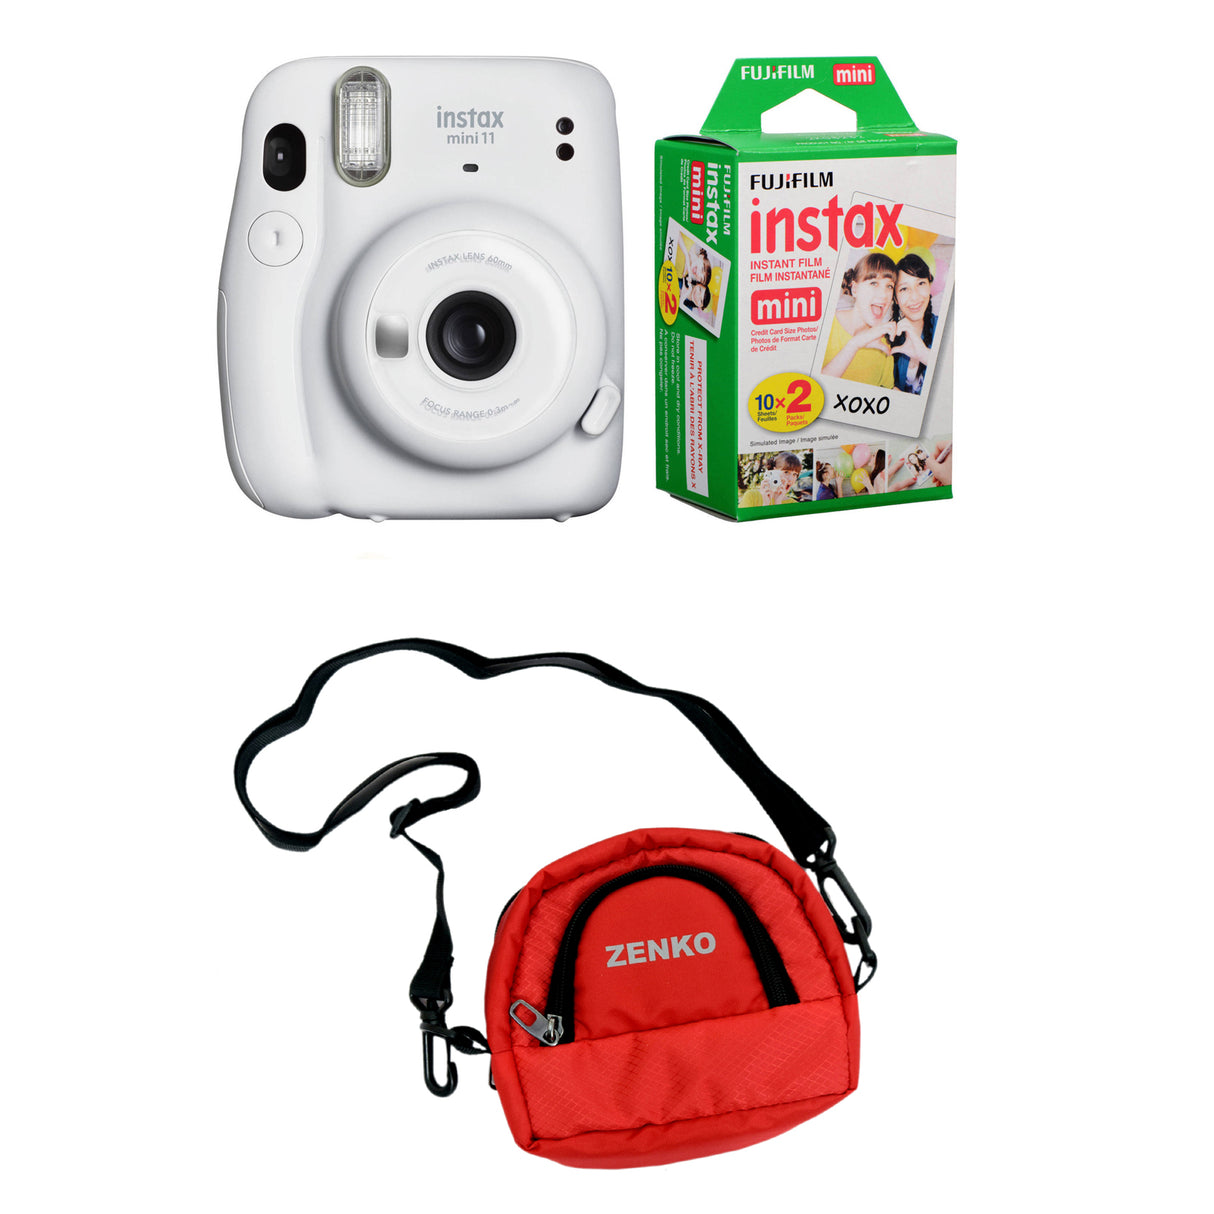 FUJIFILM INSTAX Mini 11 Instant Film Camera with Twin Pack of Instant Film With Red Pouch Kit (20 Exposures) Ice White